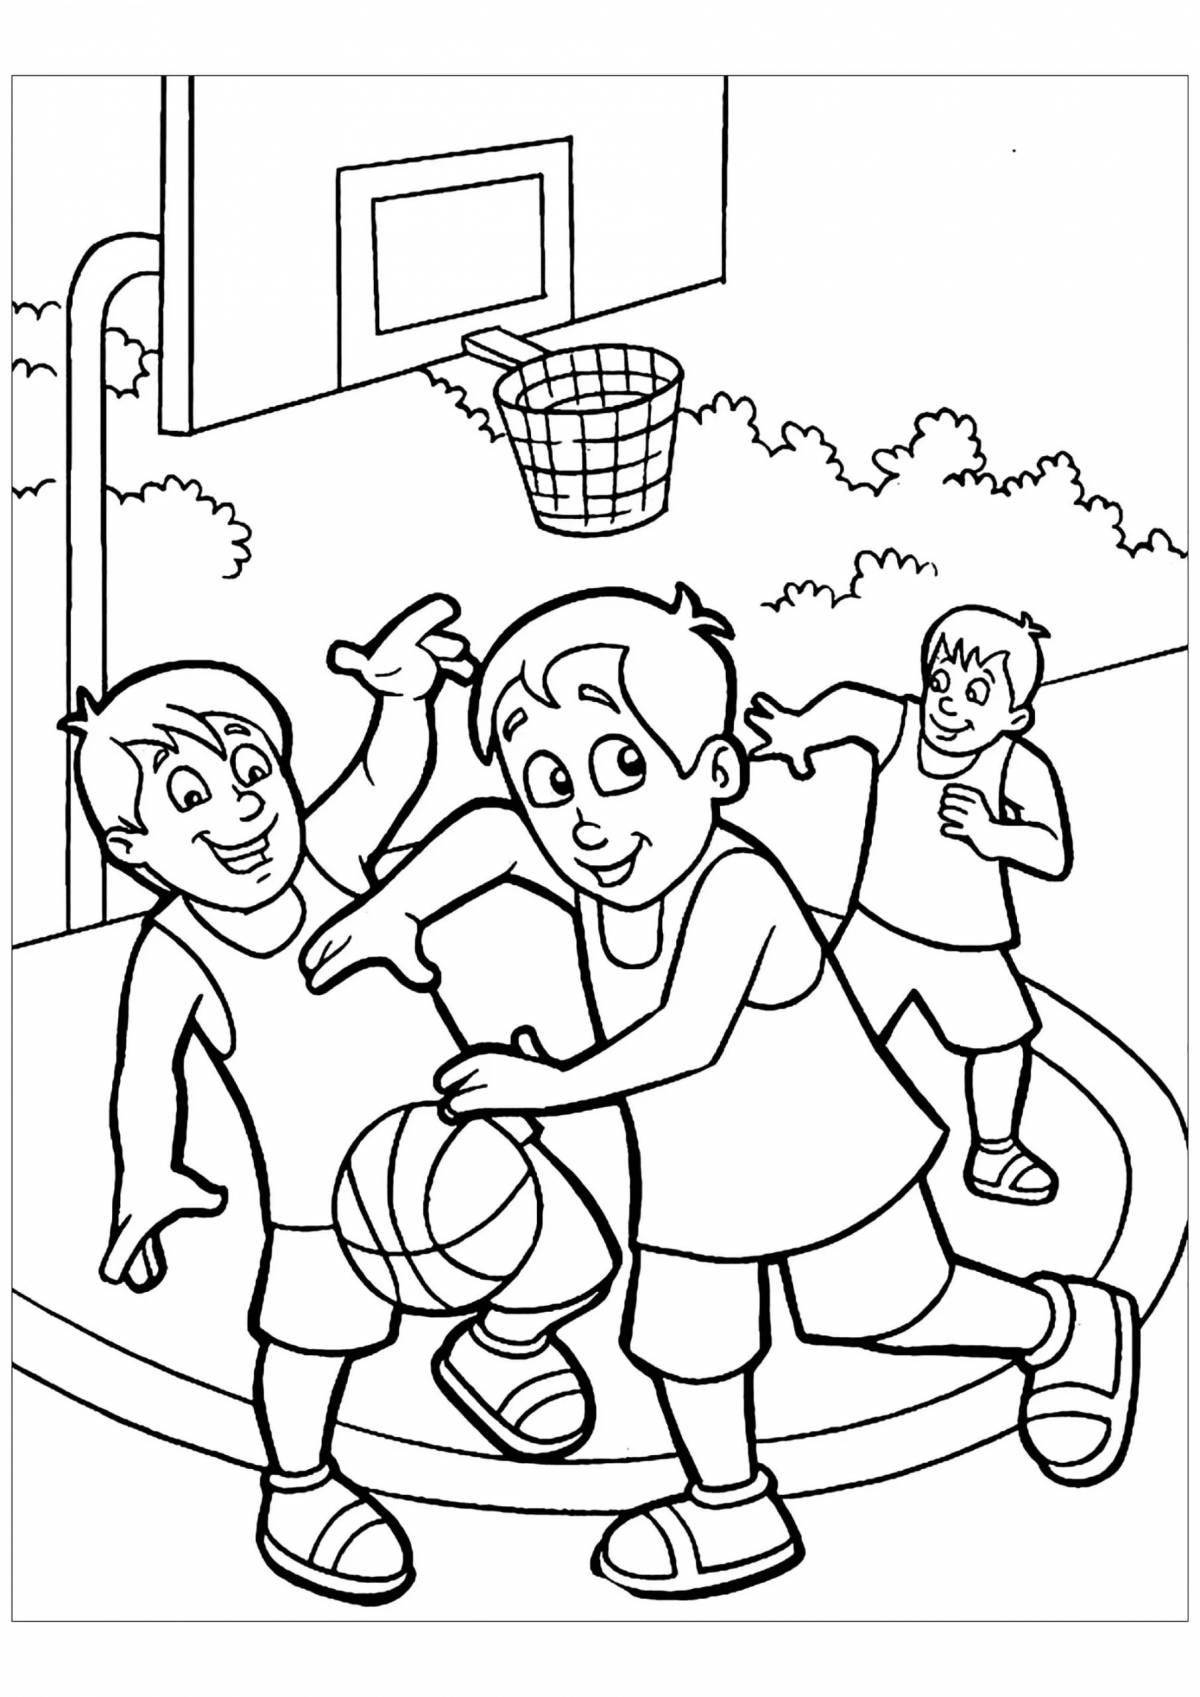 Color frenzy gimme game coloring page